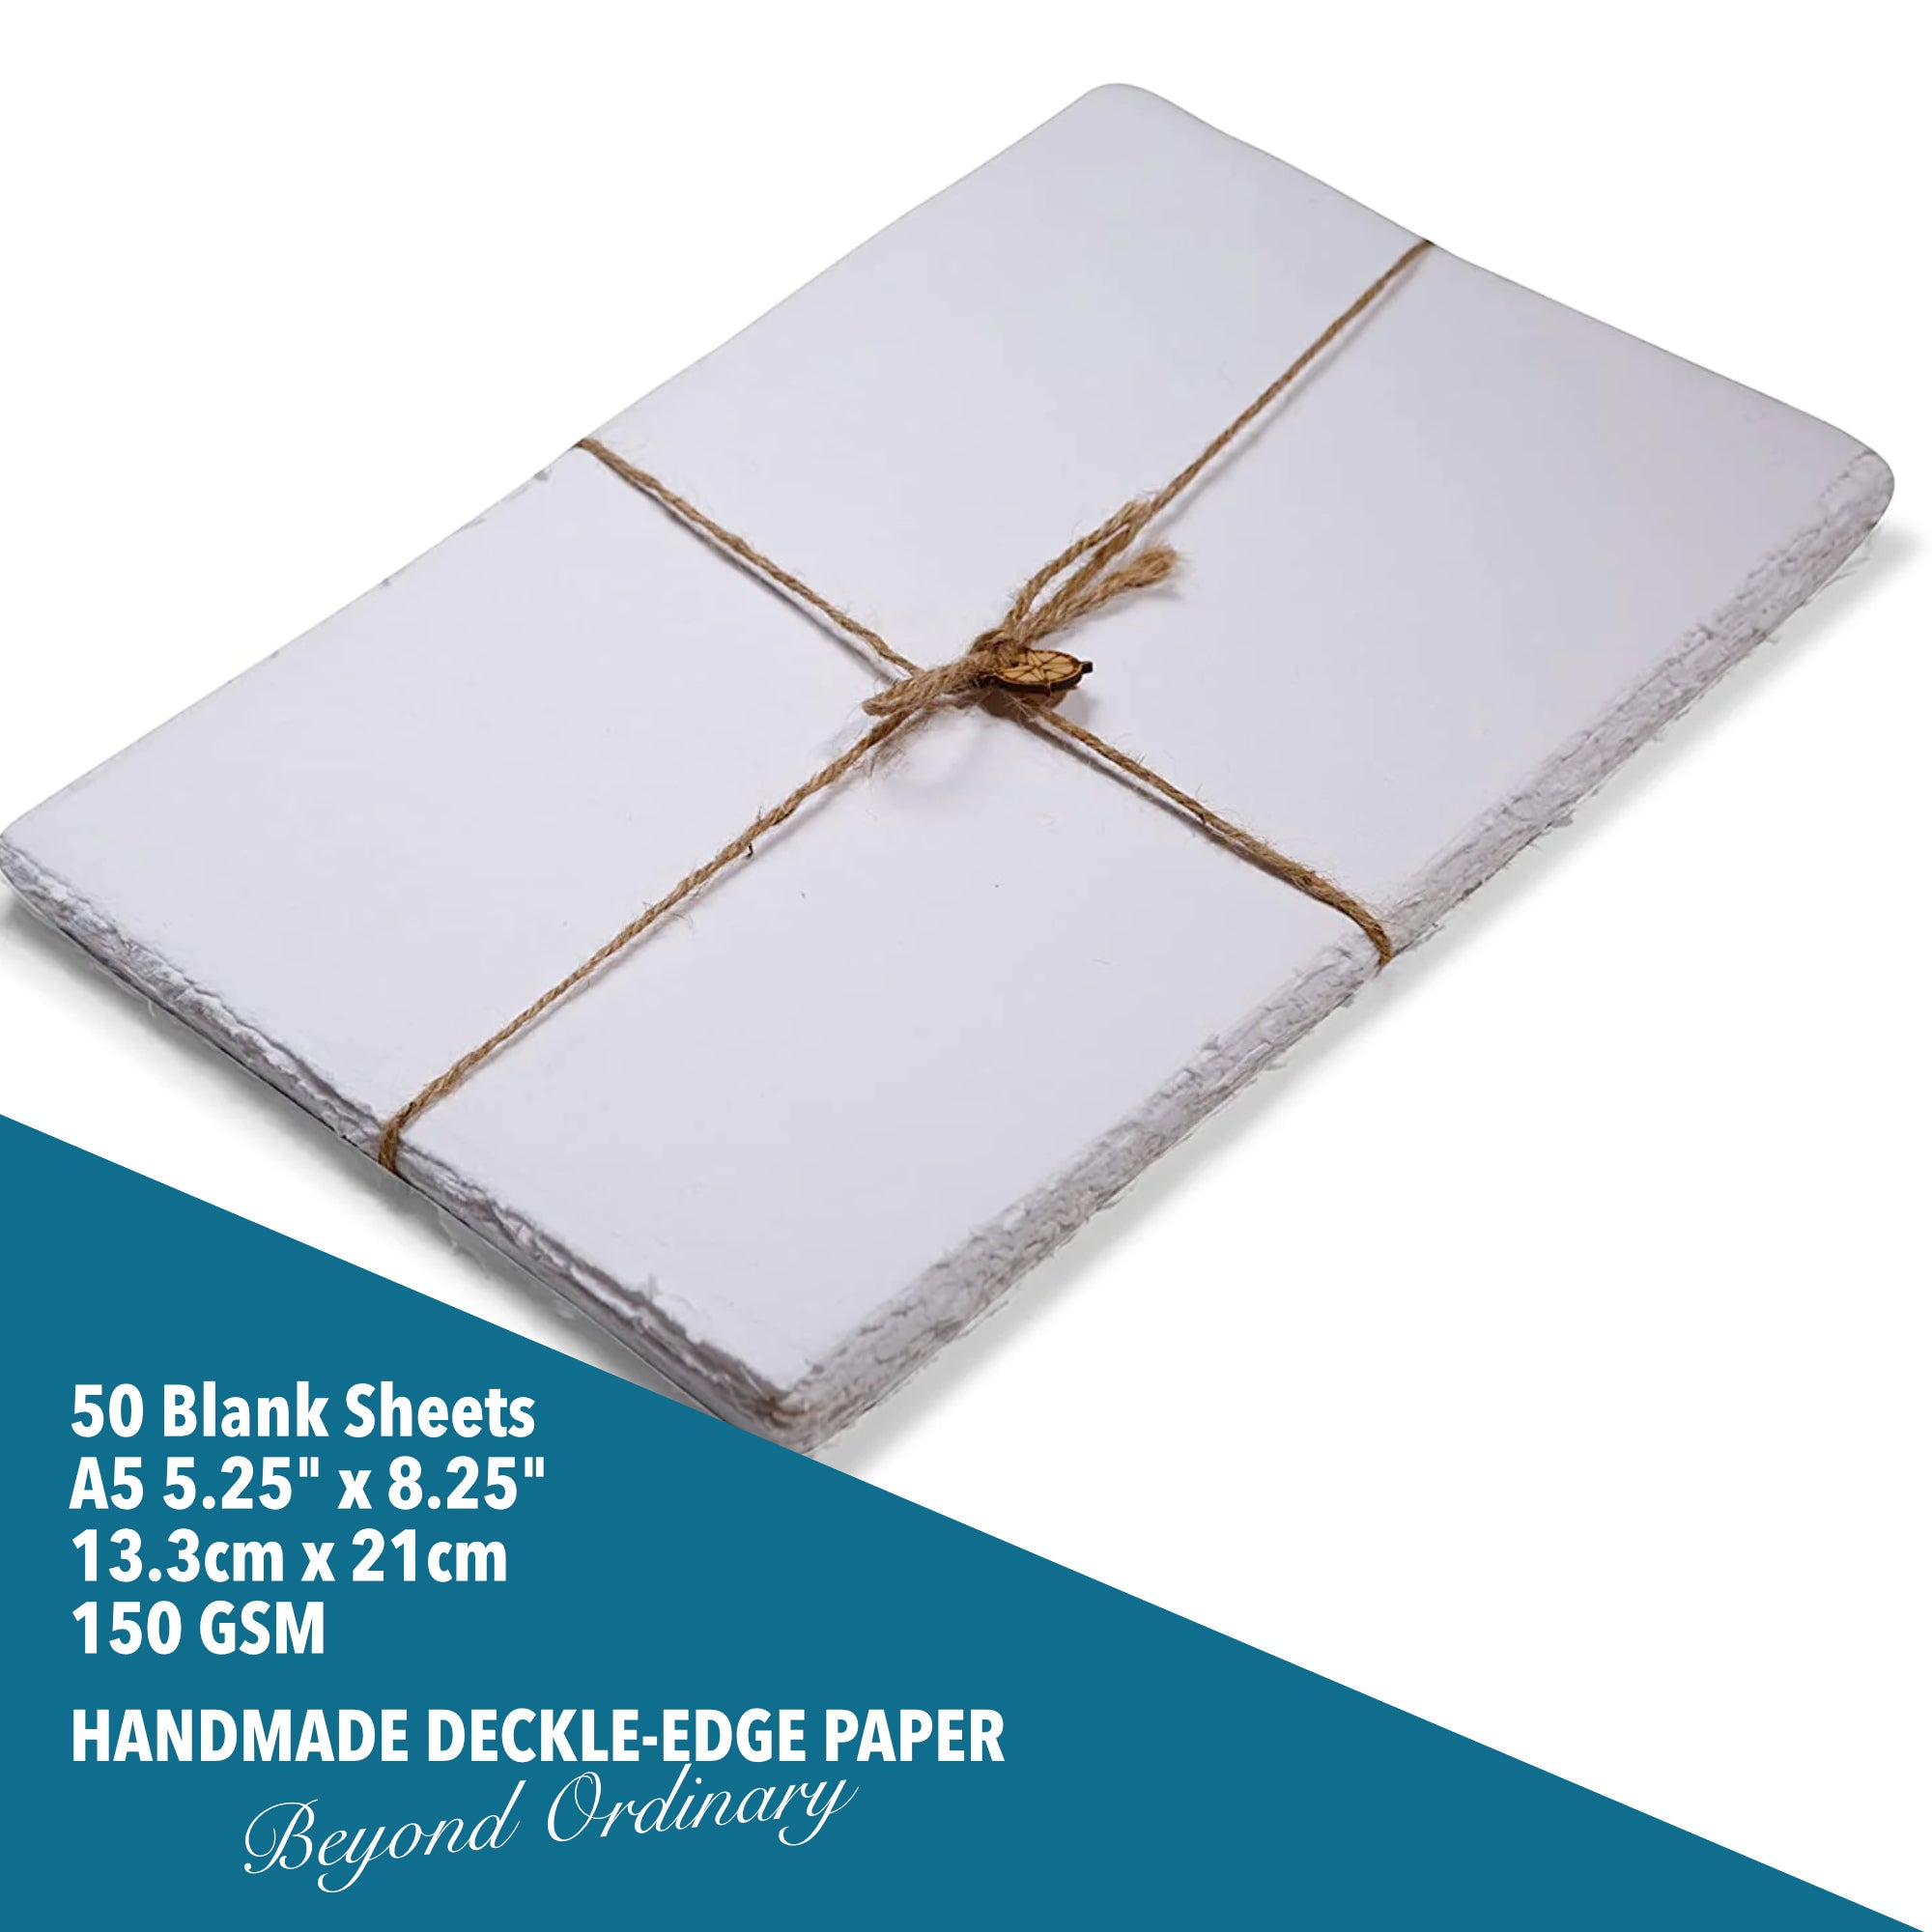 Wanderings Handmade White Deckle Edge Blank Paper Cards - only 3.5x2” -  Pack of 50 - Watercolor Mixed Media - Ideal for Arts & Crafts, Gift Tags